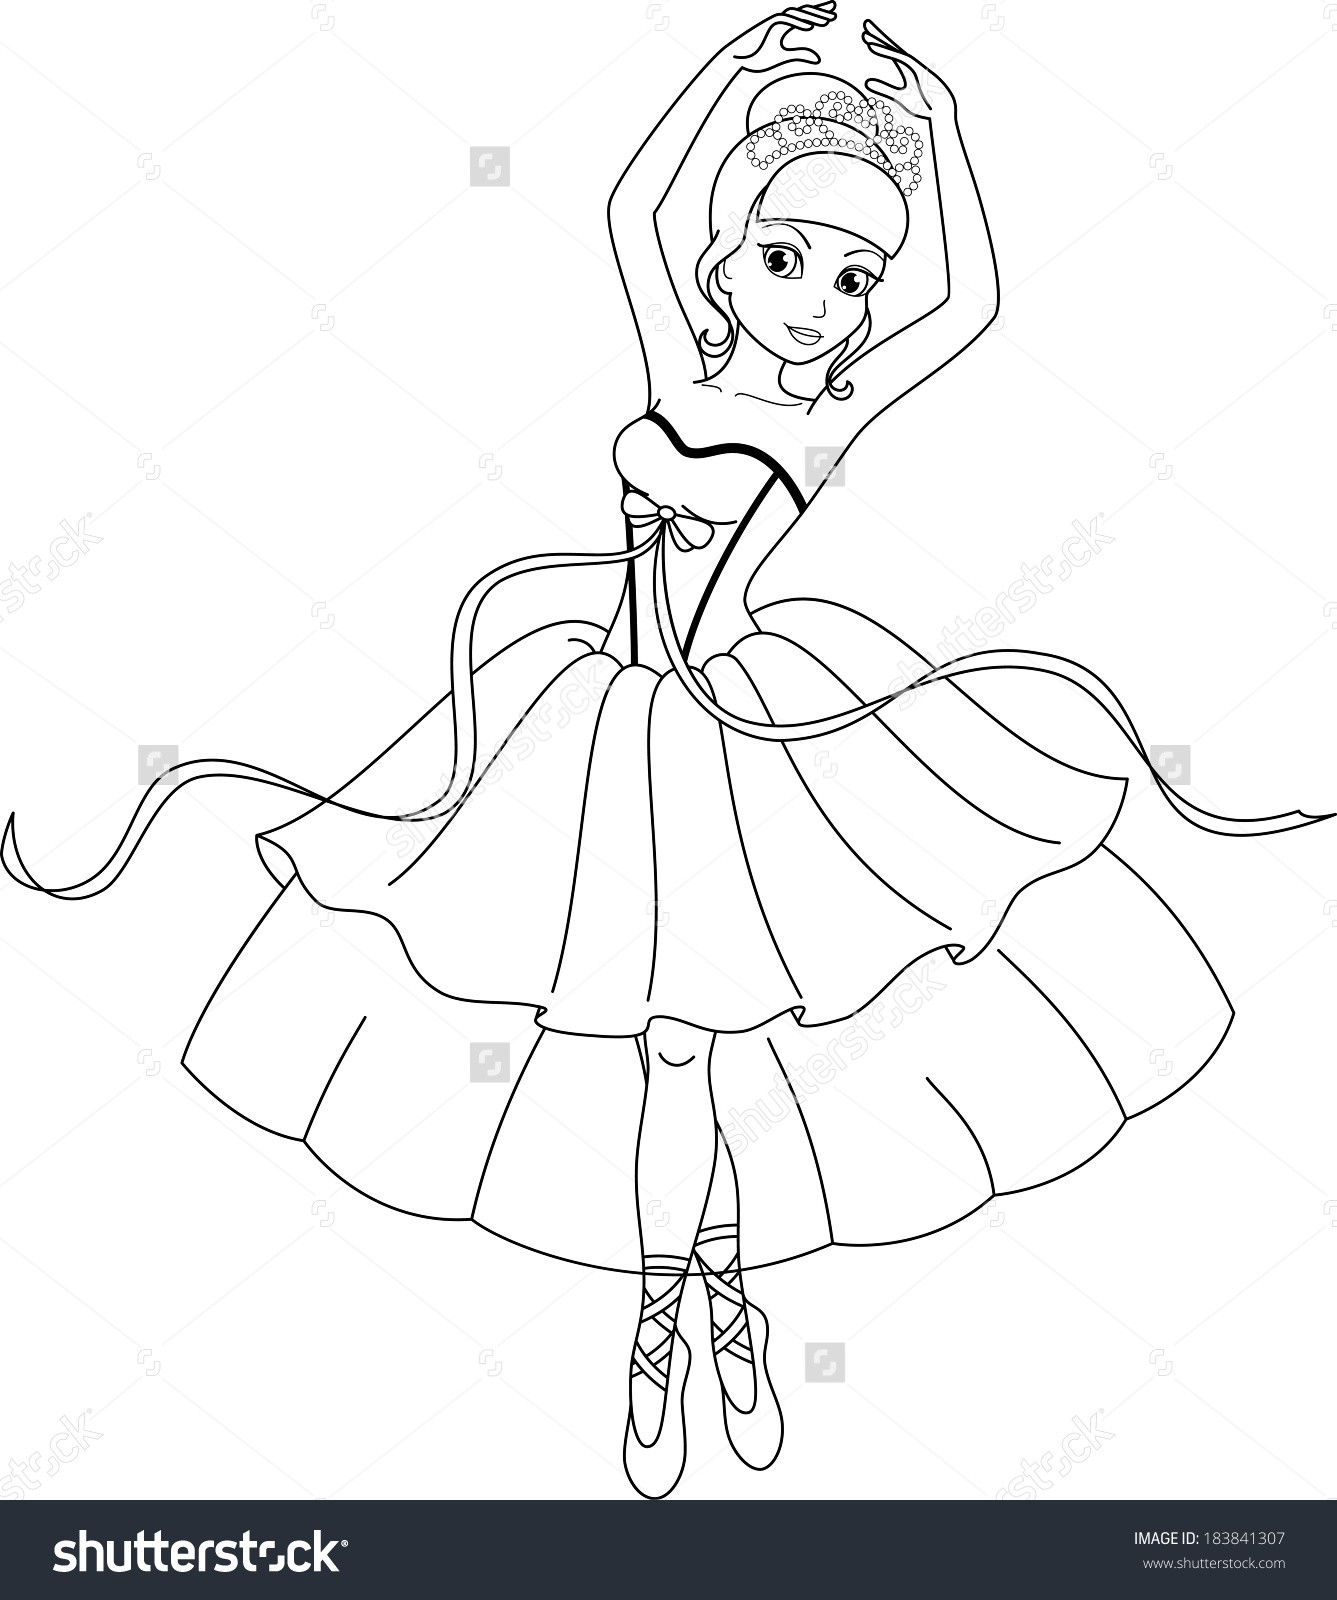 Outstanding Ballerina Colouring Page Great Ballet Coloring Pages To Print Princess Pdf